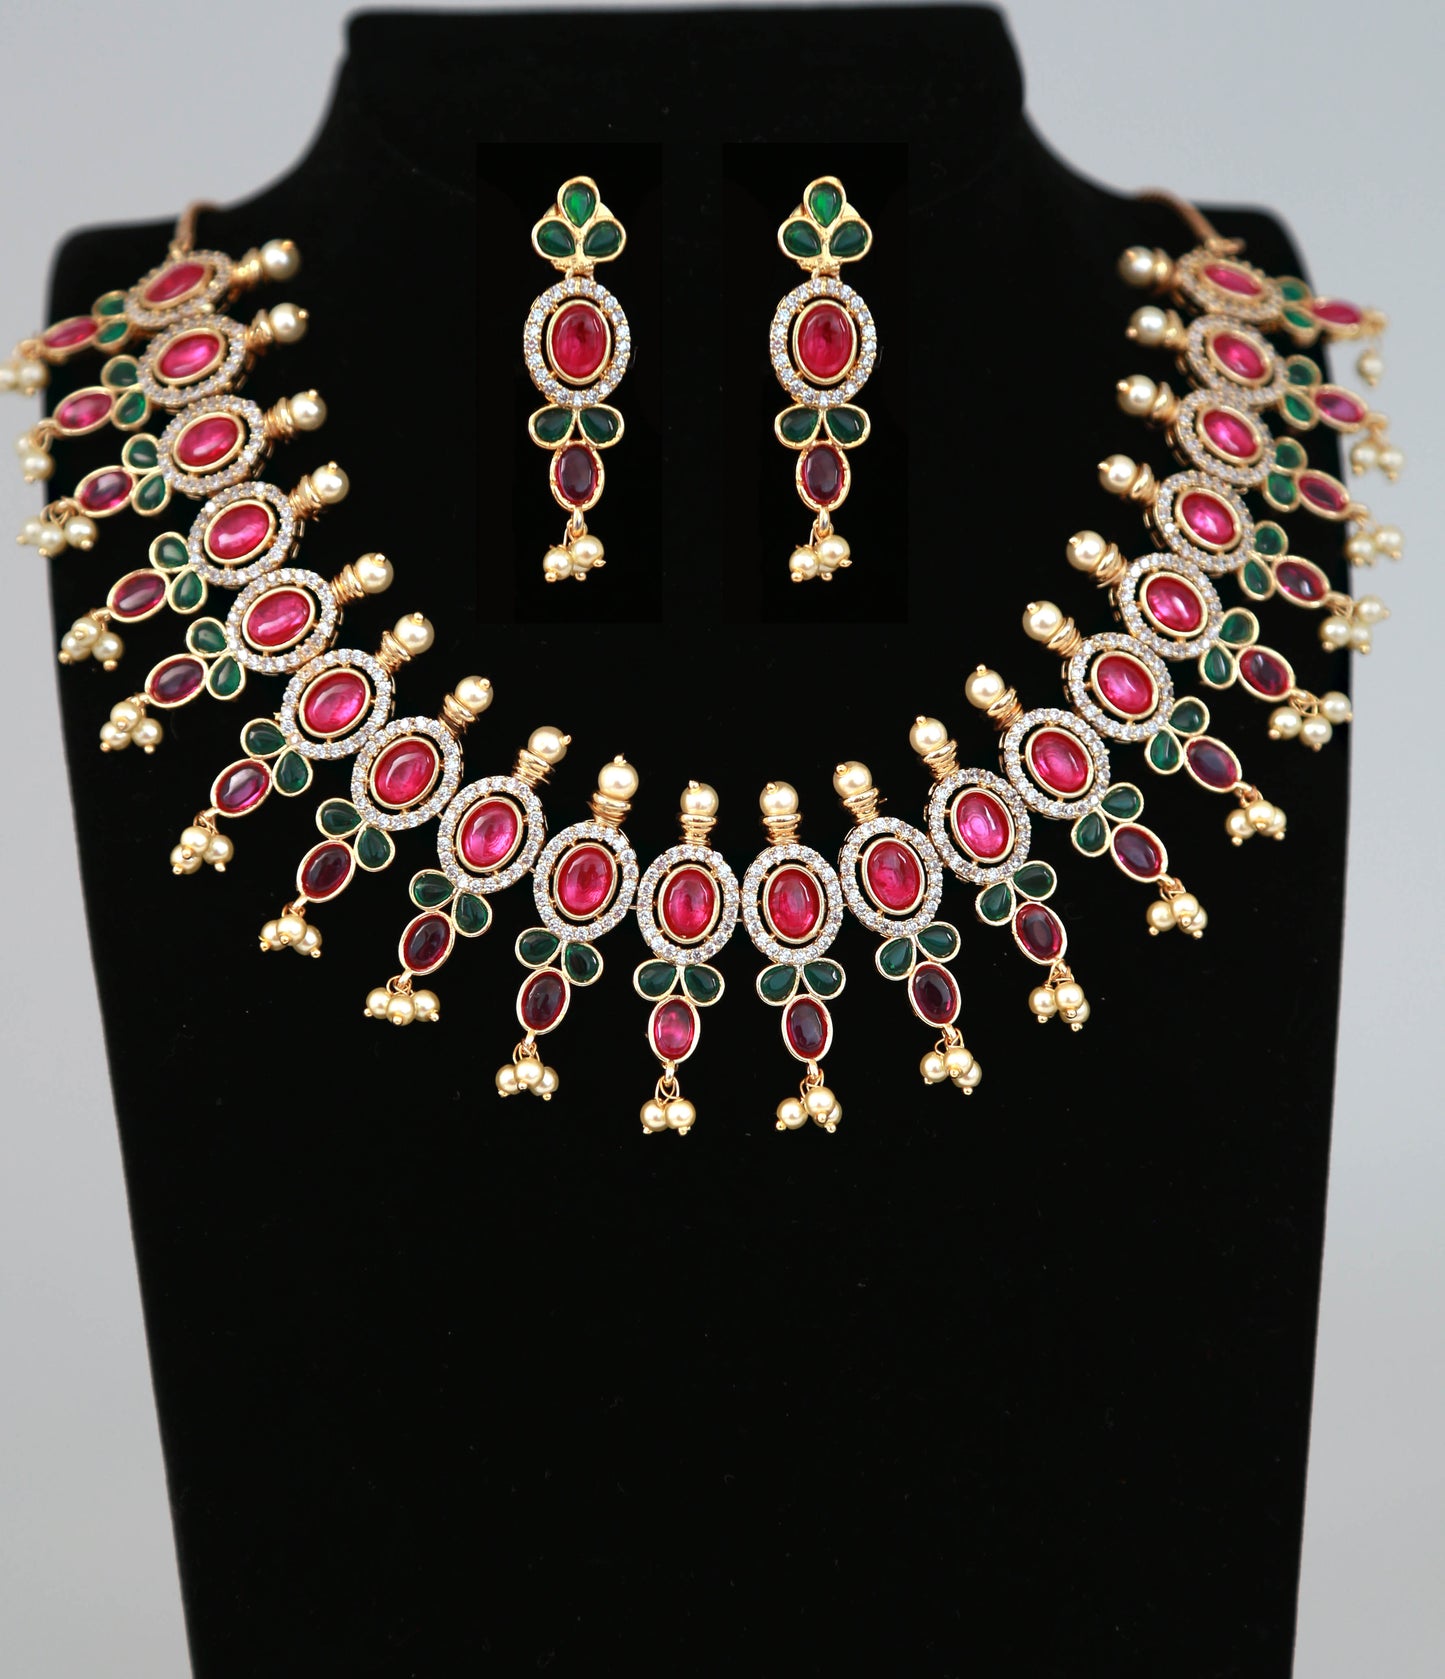 Real kemp stone South Indian necklace|Pink Oval stone Kemp Jewelry|One gram gold necklace Earring set